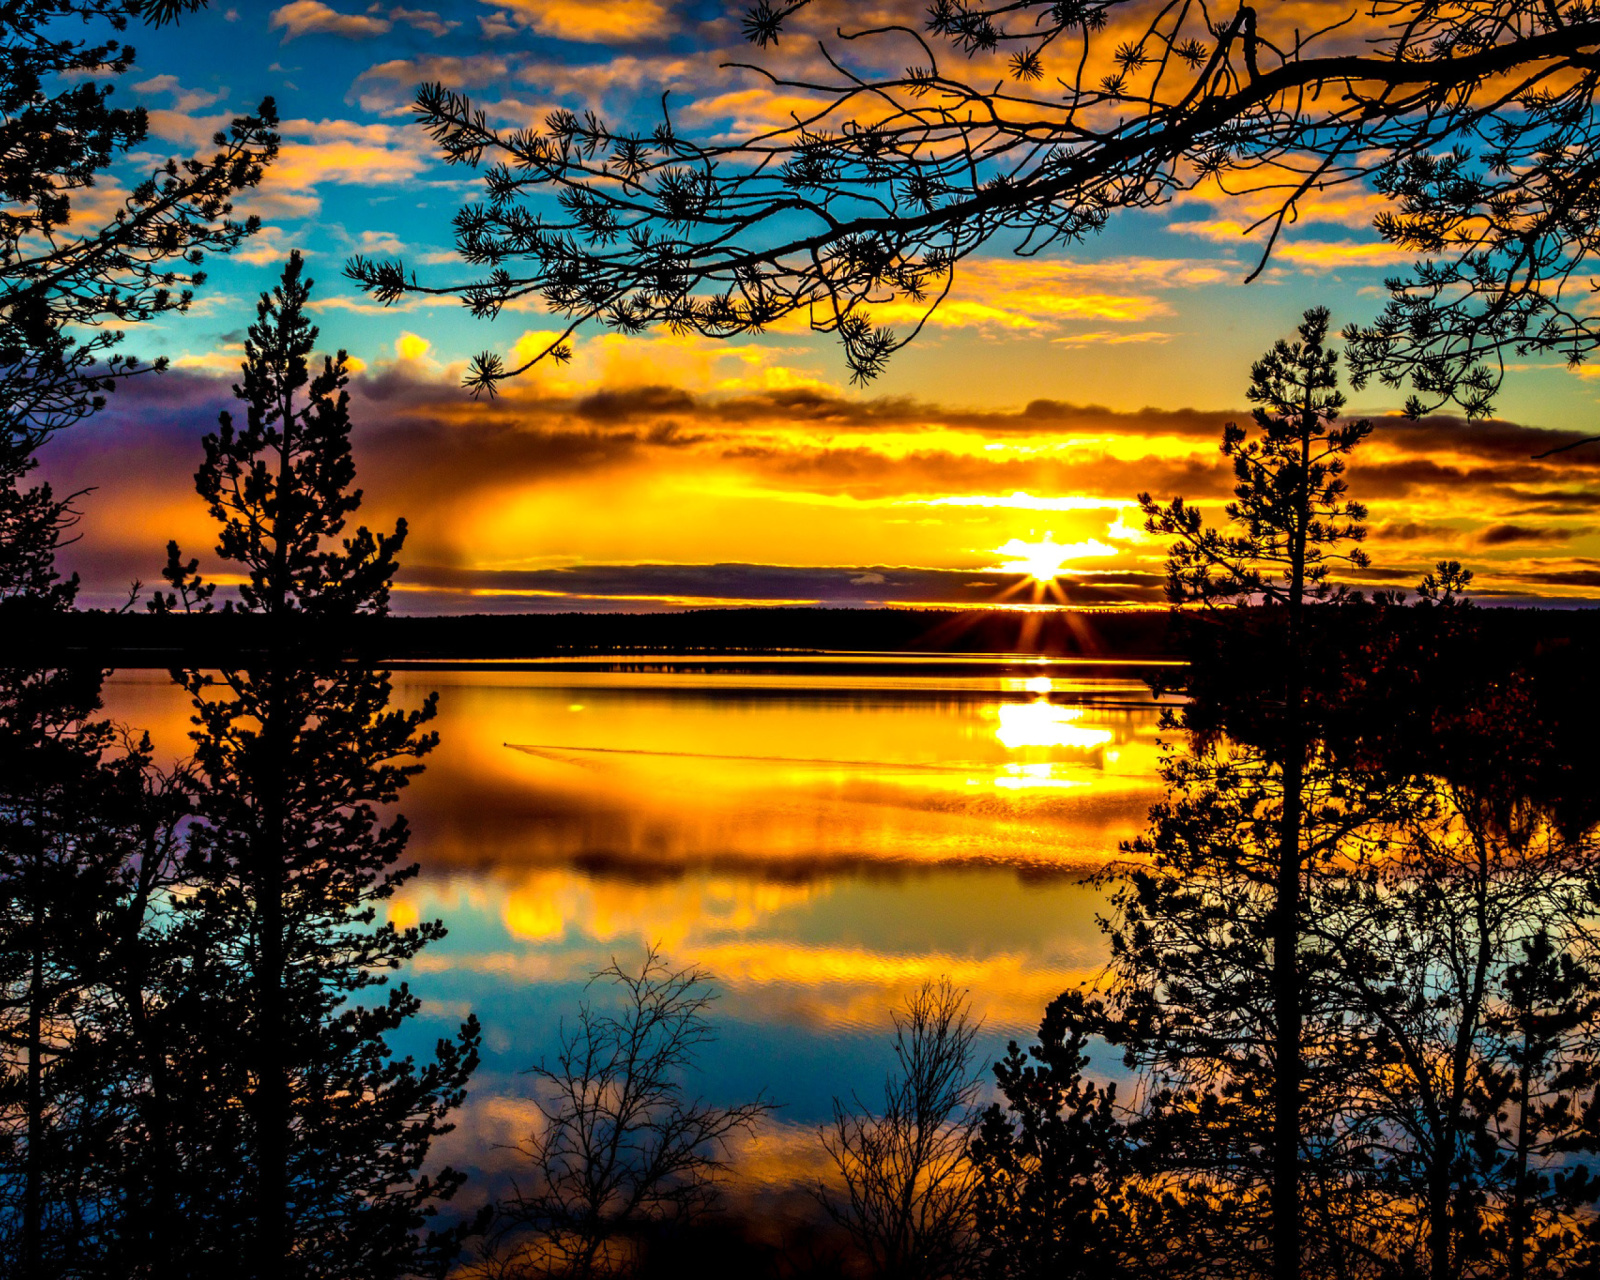 Sunrise and Sunset HDR wallpaper 1600x1280